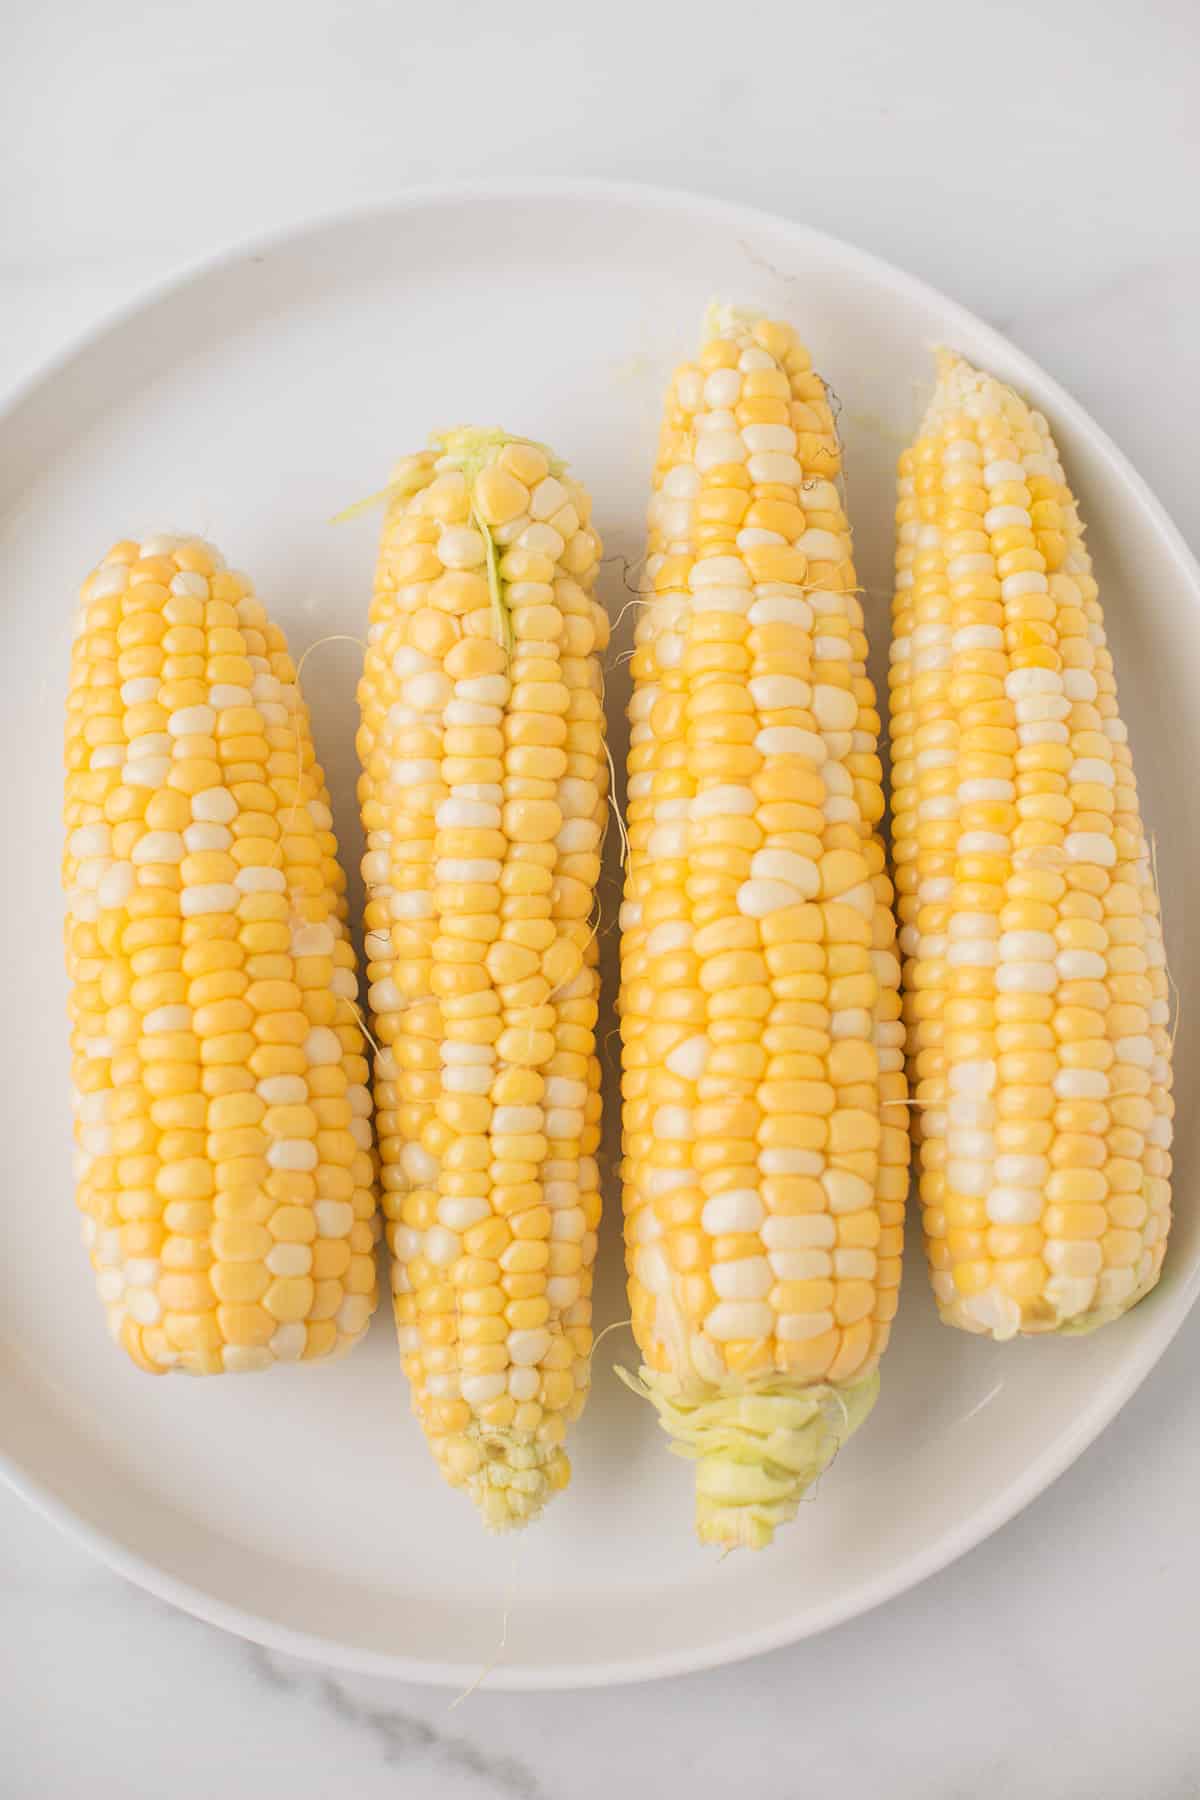 four pieces of corn on a plate with the corn husks removed.